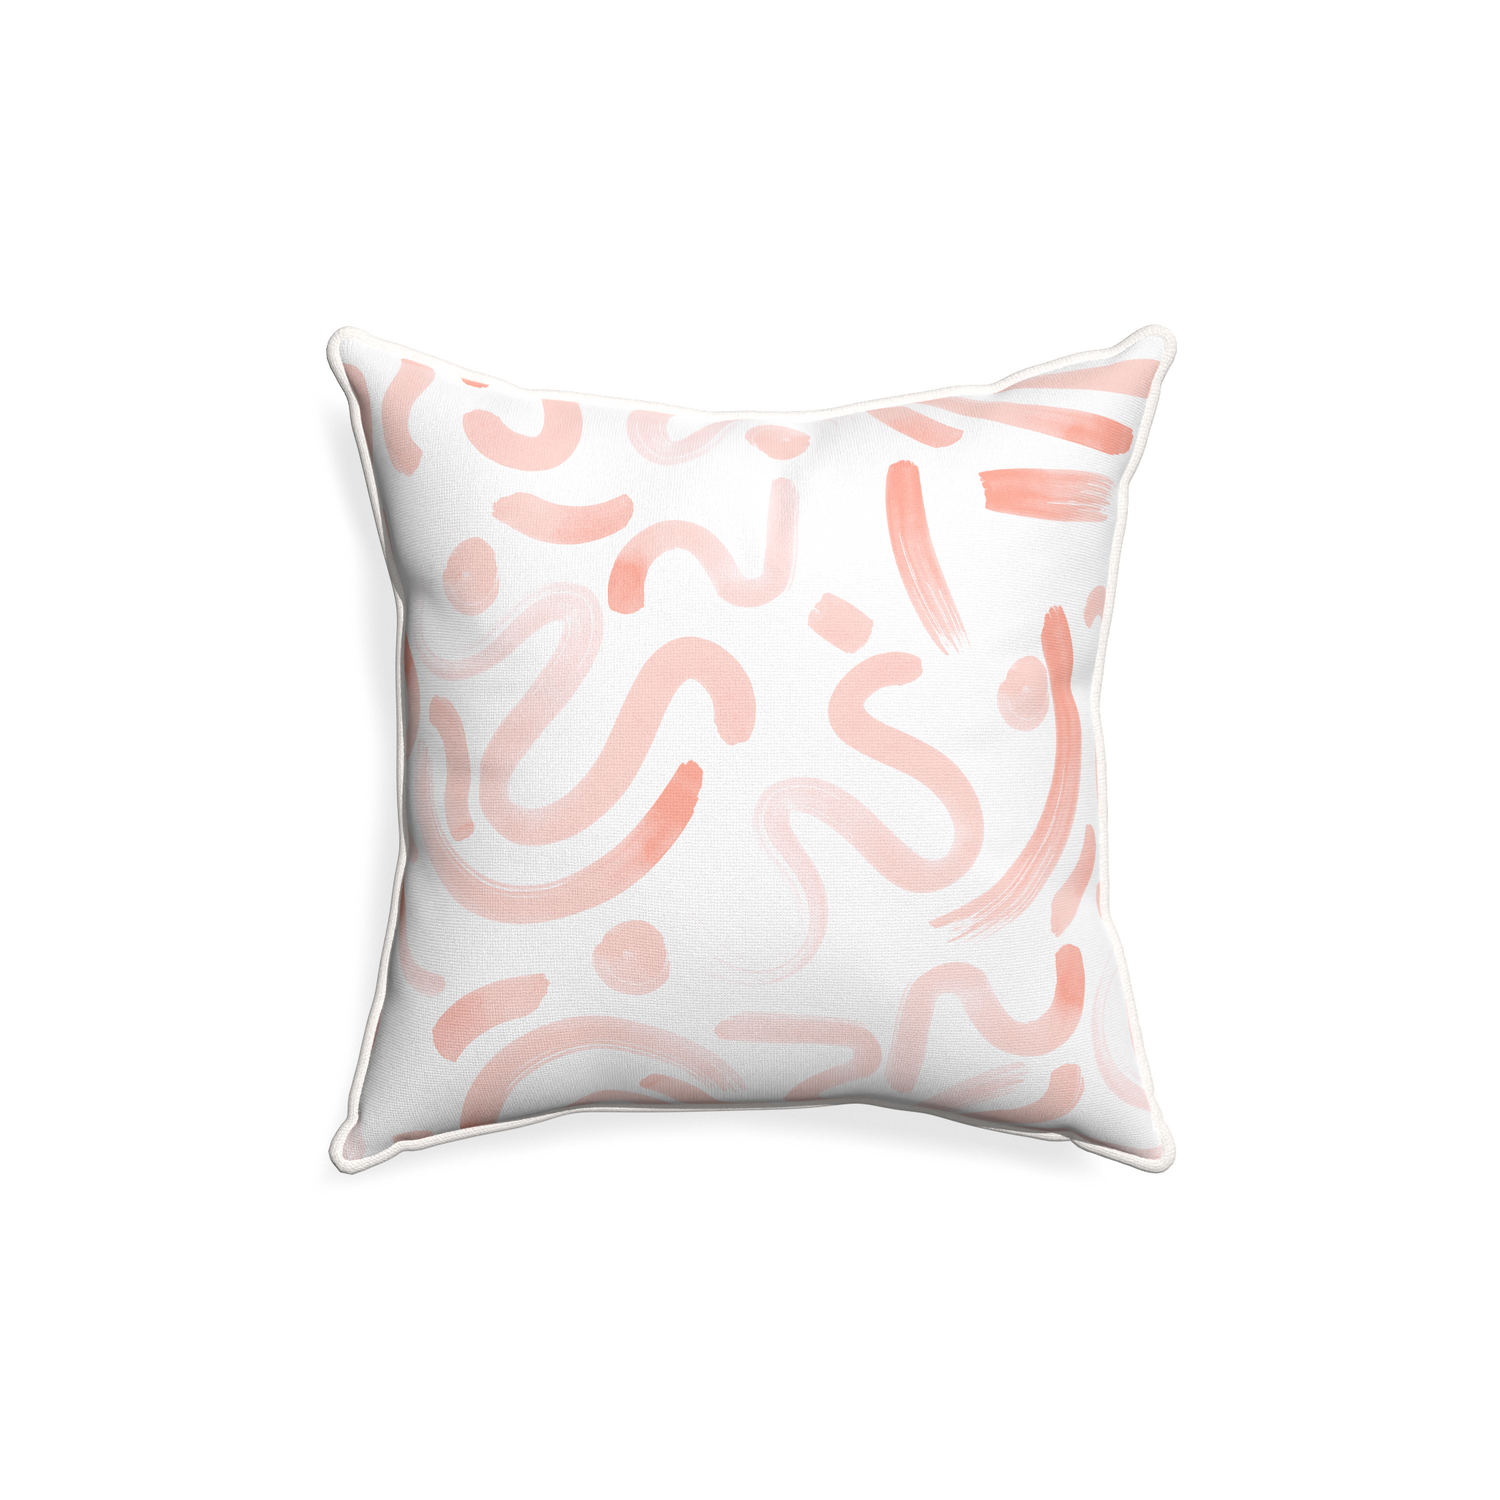 18-square hockney pink custom pillow with snow piping on white background